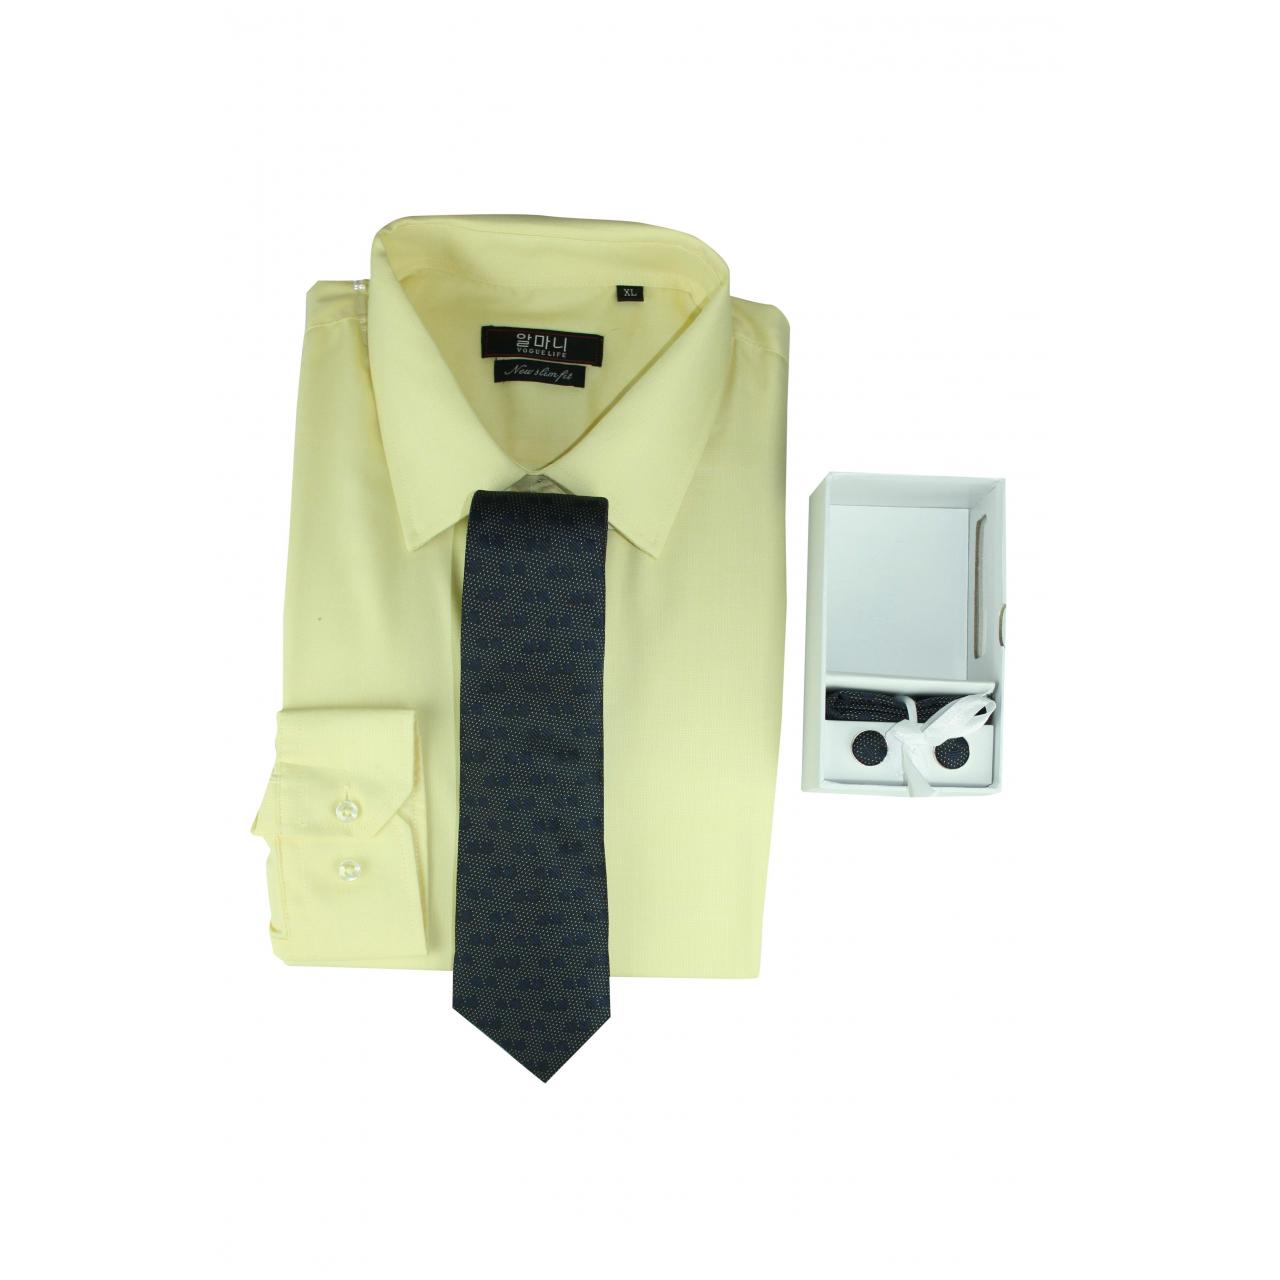 VOGUE LIFE Formal Plain Collar Yellow Shirt Outfit Mens With Tie Set